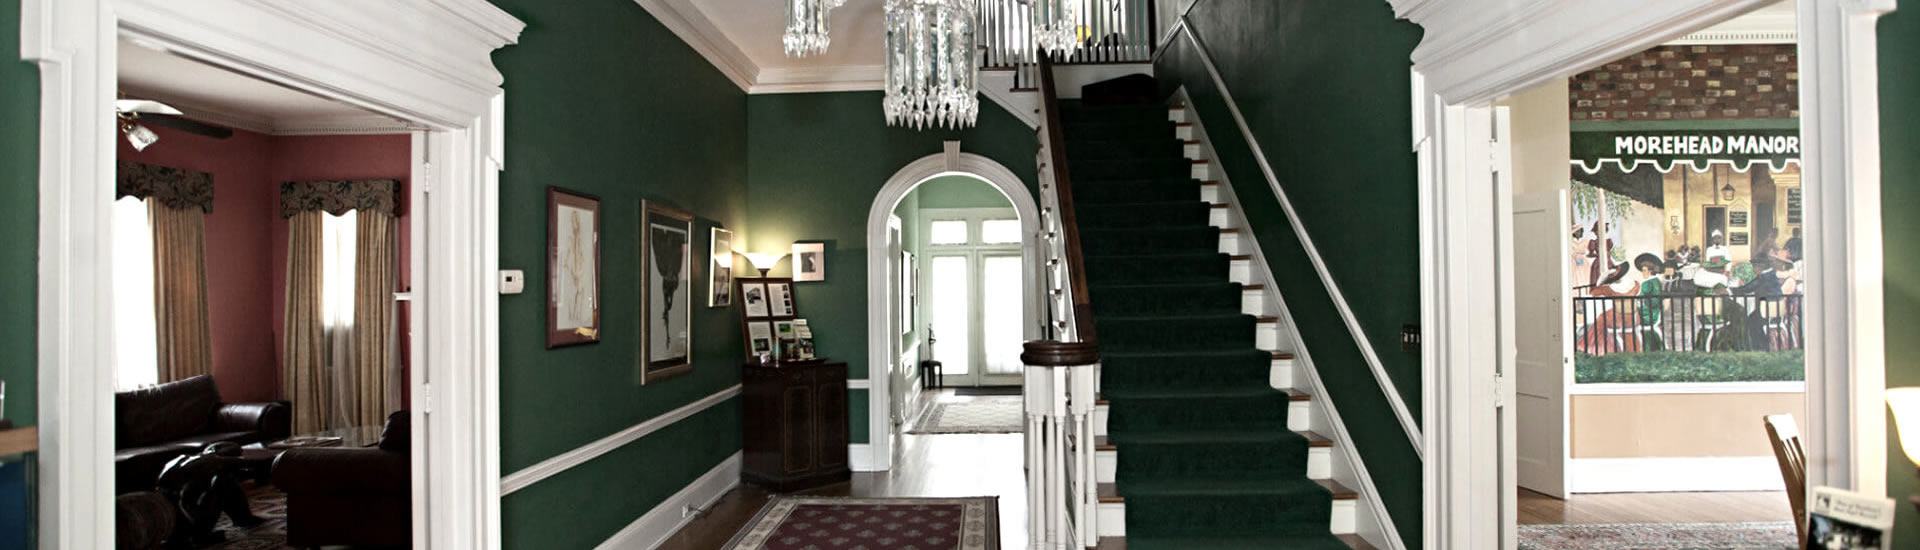 Grand entryway with elegant staircase, decorated in deep green with wood floors and a crystal chandelier